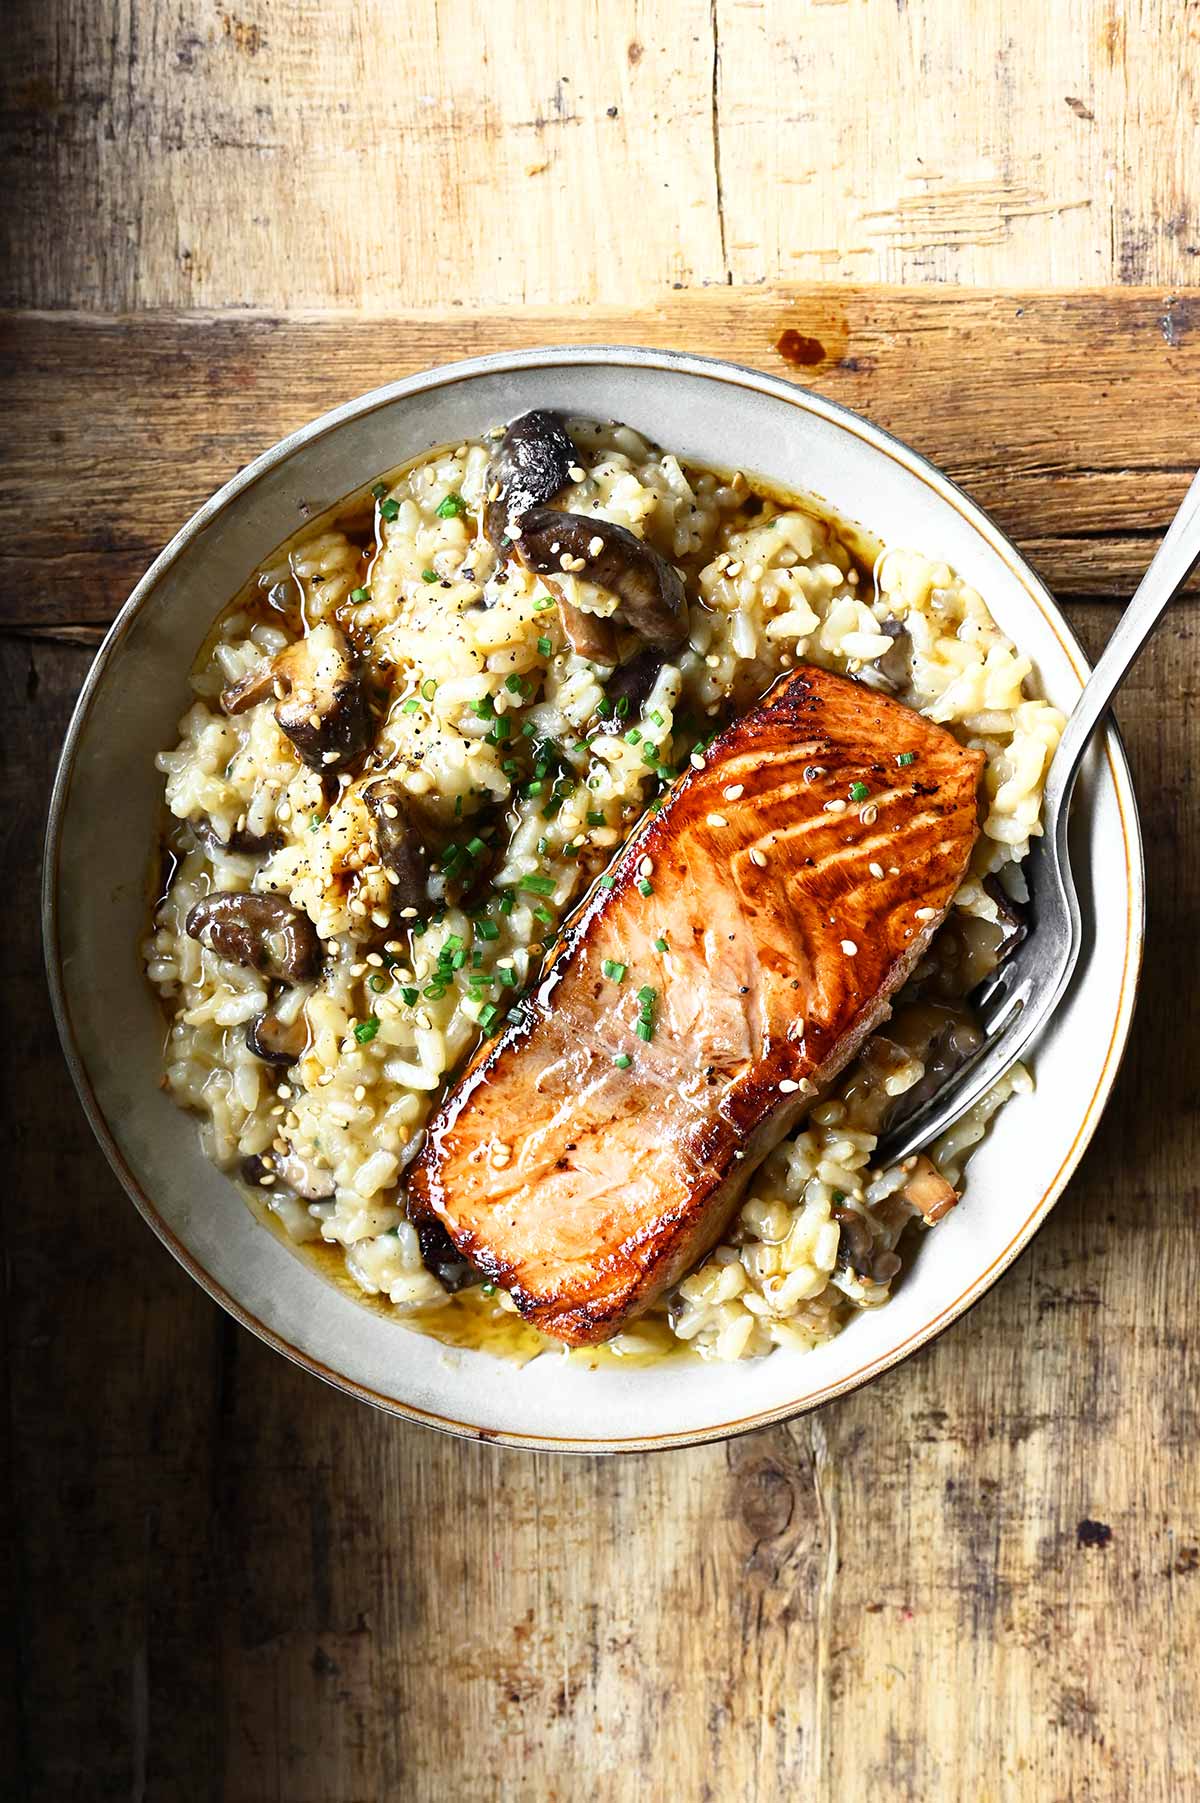 Japanese Style Risotto with Seared Salmon - Serving Dumplings